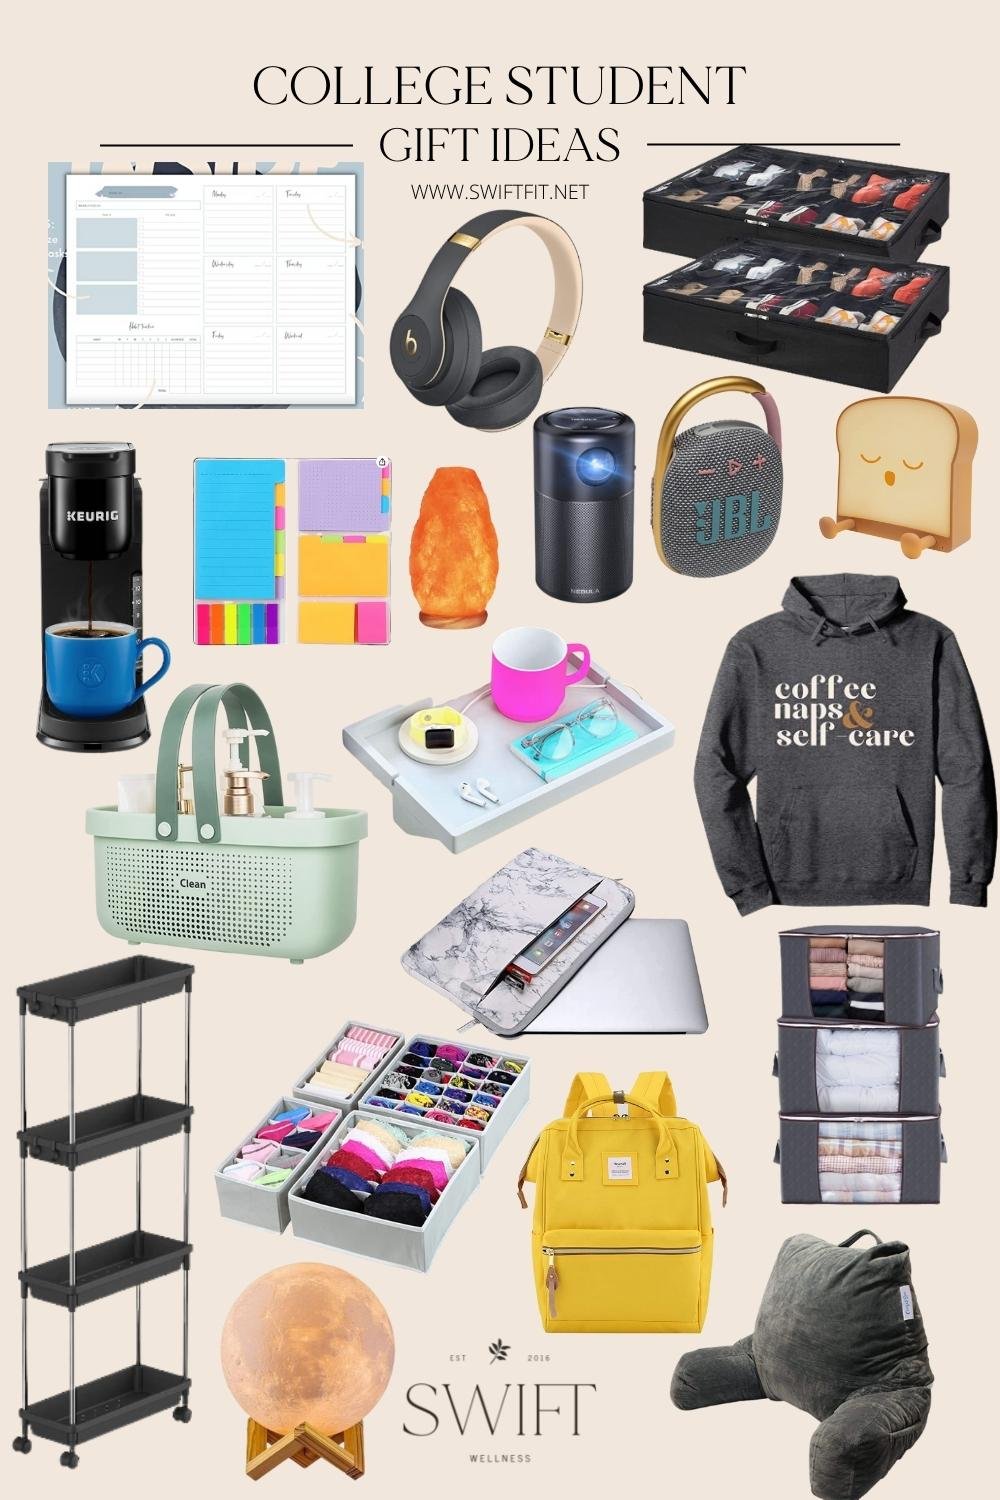 Discover more than 87 gifts for college students latest